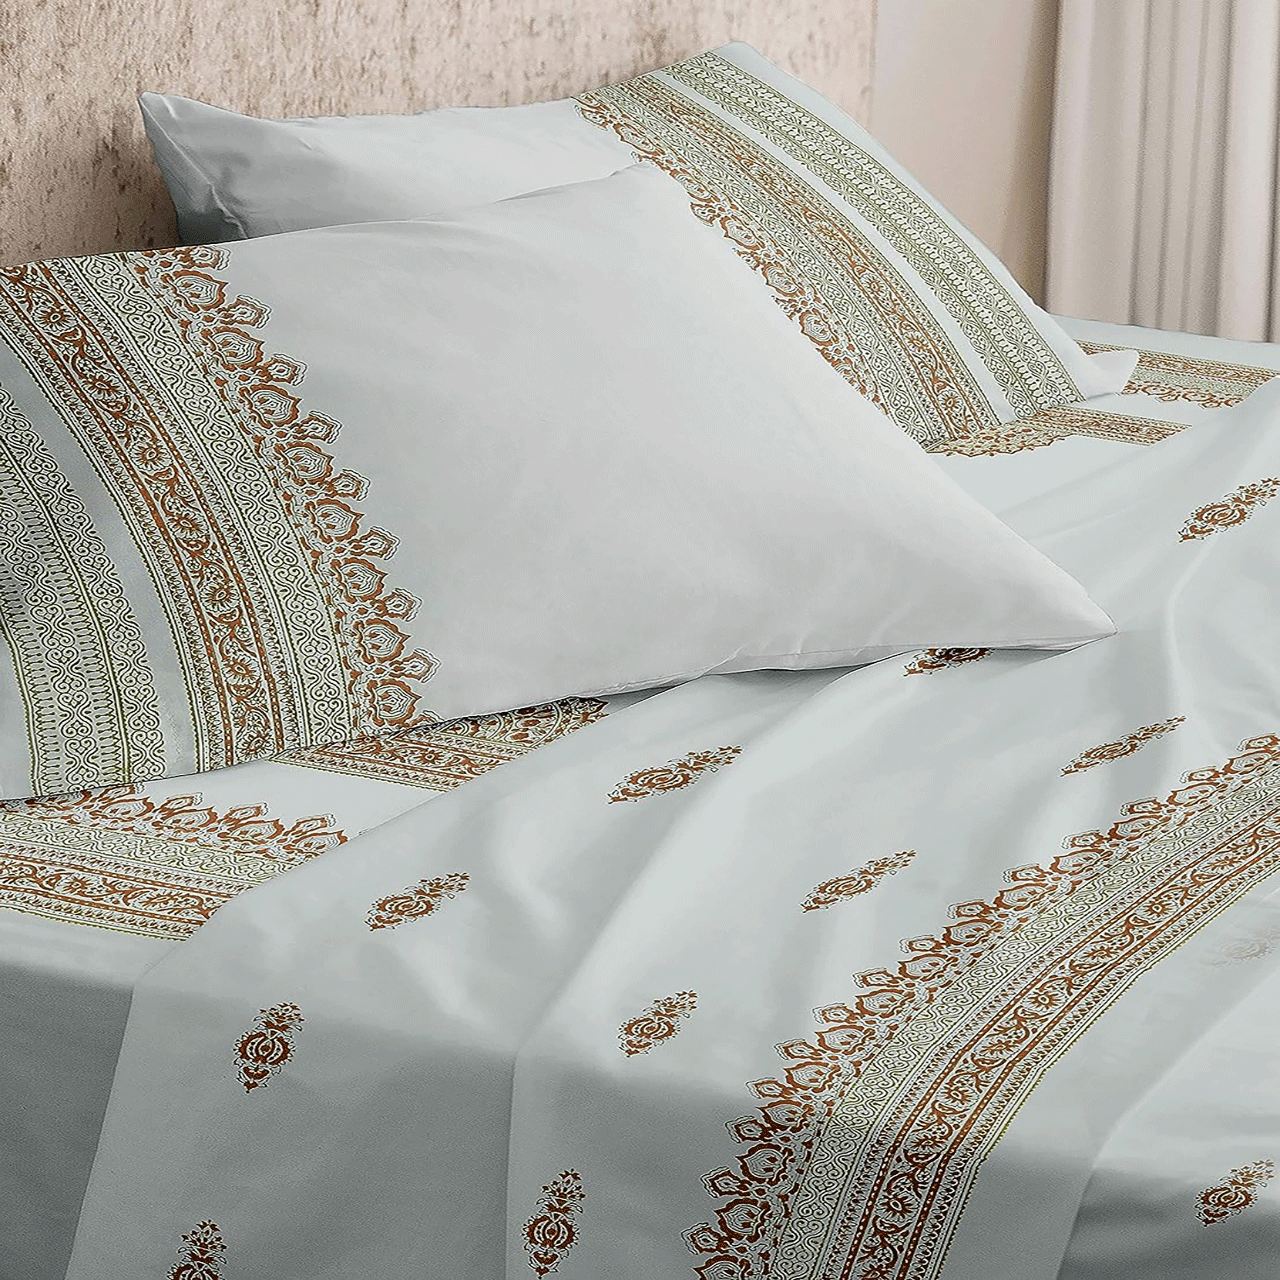 EUQIFAH,Handmade with Woodenblock, Cotton Percale Bed Sheet Set - 4 Pieces - Cool, Breathable, Durable - Fade & Shrink Resistant, Hypoallergenic - Luxurious Comfort Bedding(King Size)